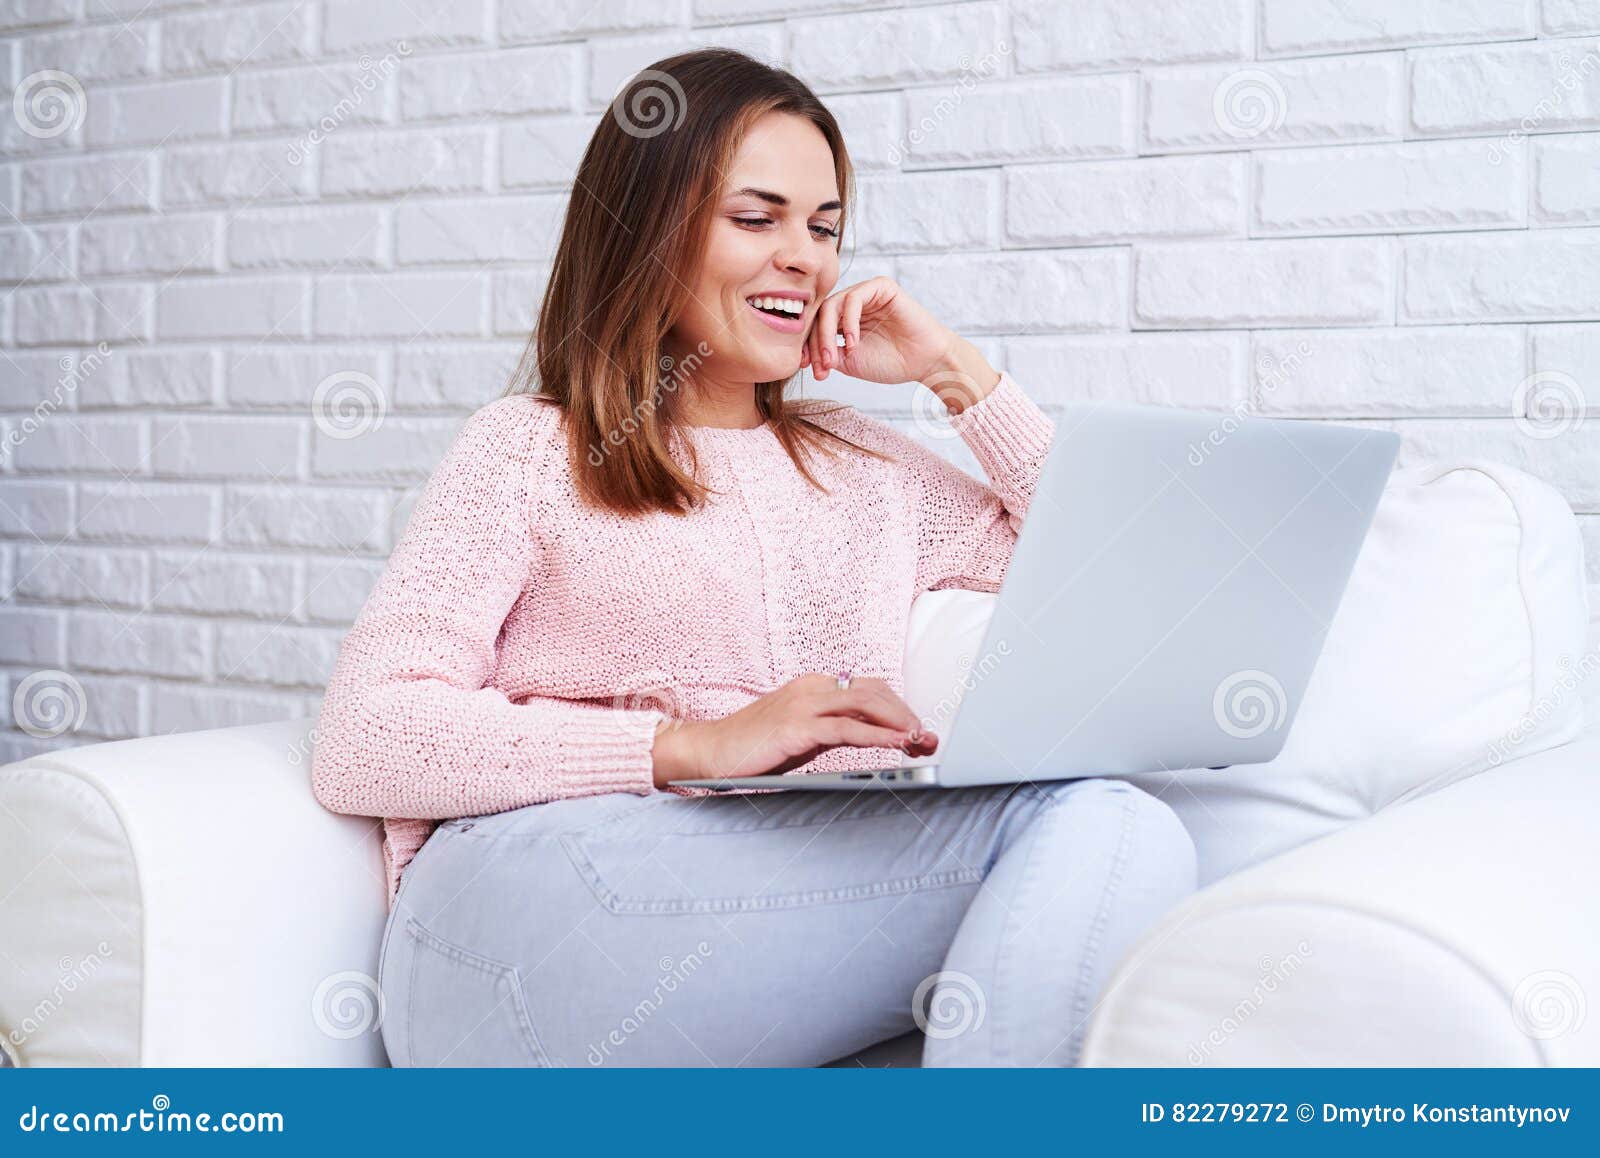 Young Girl Sitting in an Armchair and Using a Laptop Isolated Over ...